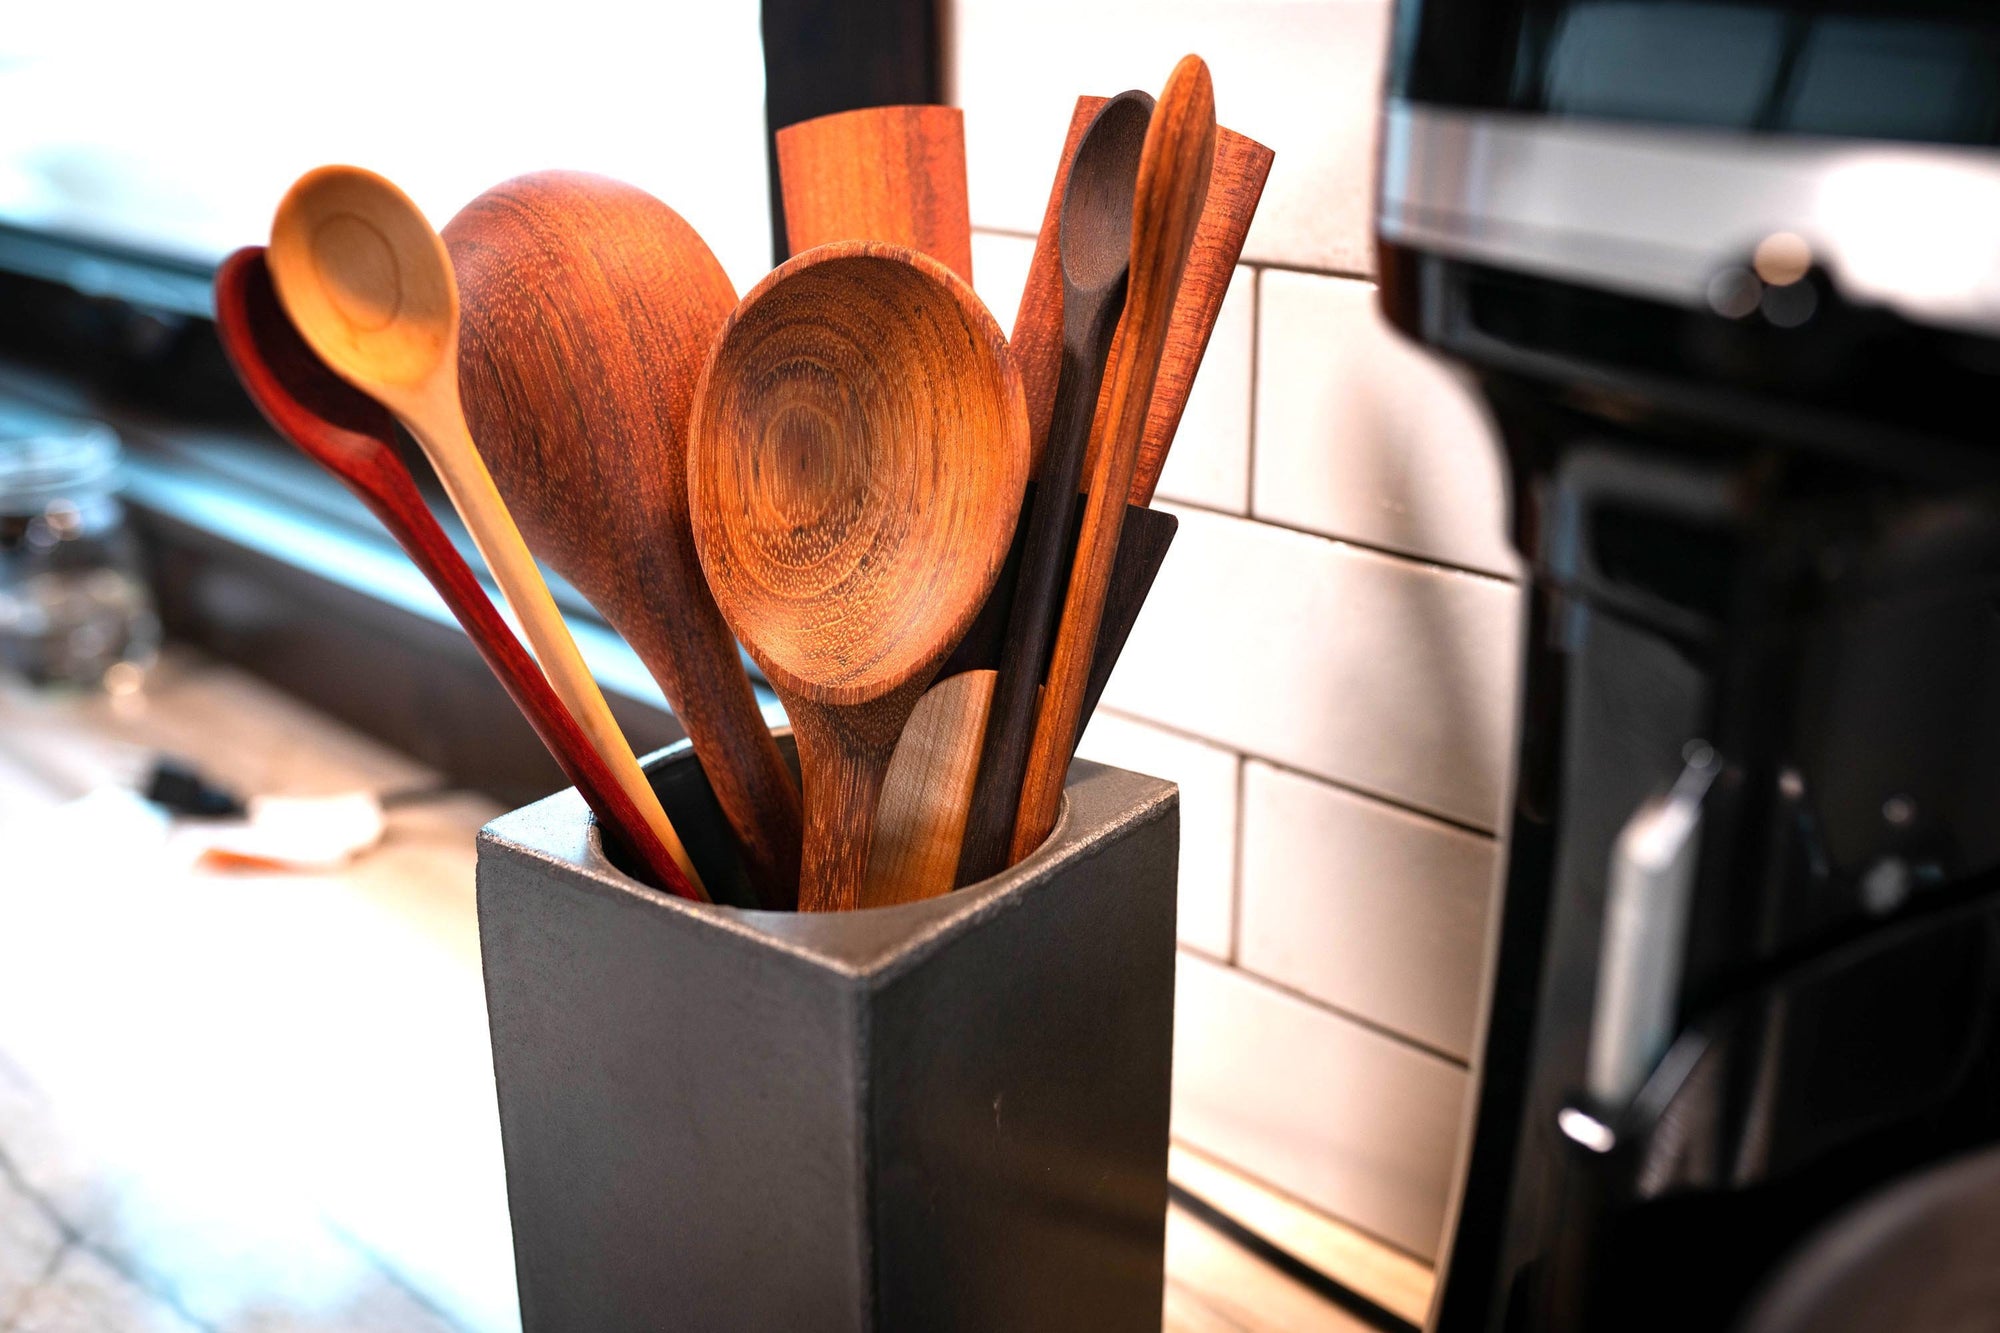 modern utensil holder for party or every day on countertop - Earlywood